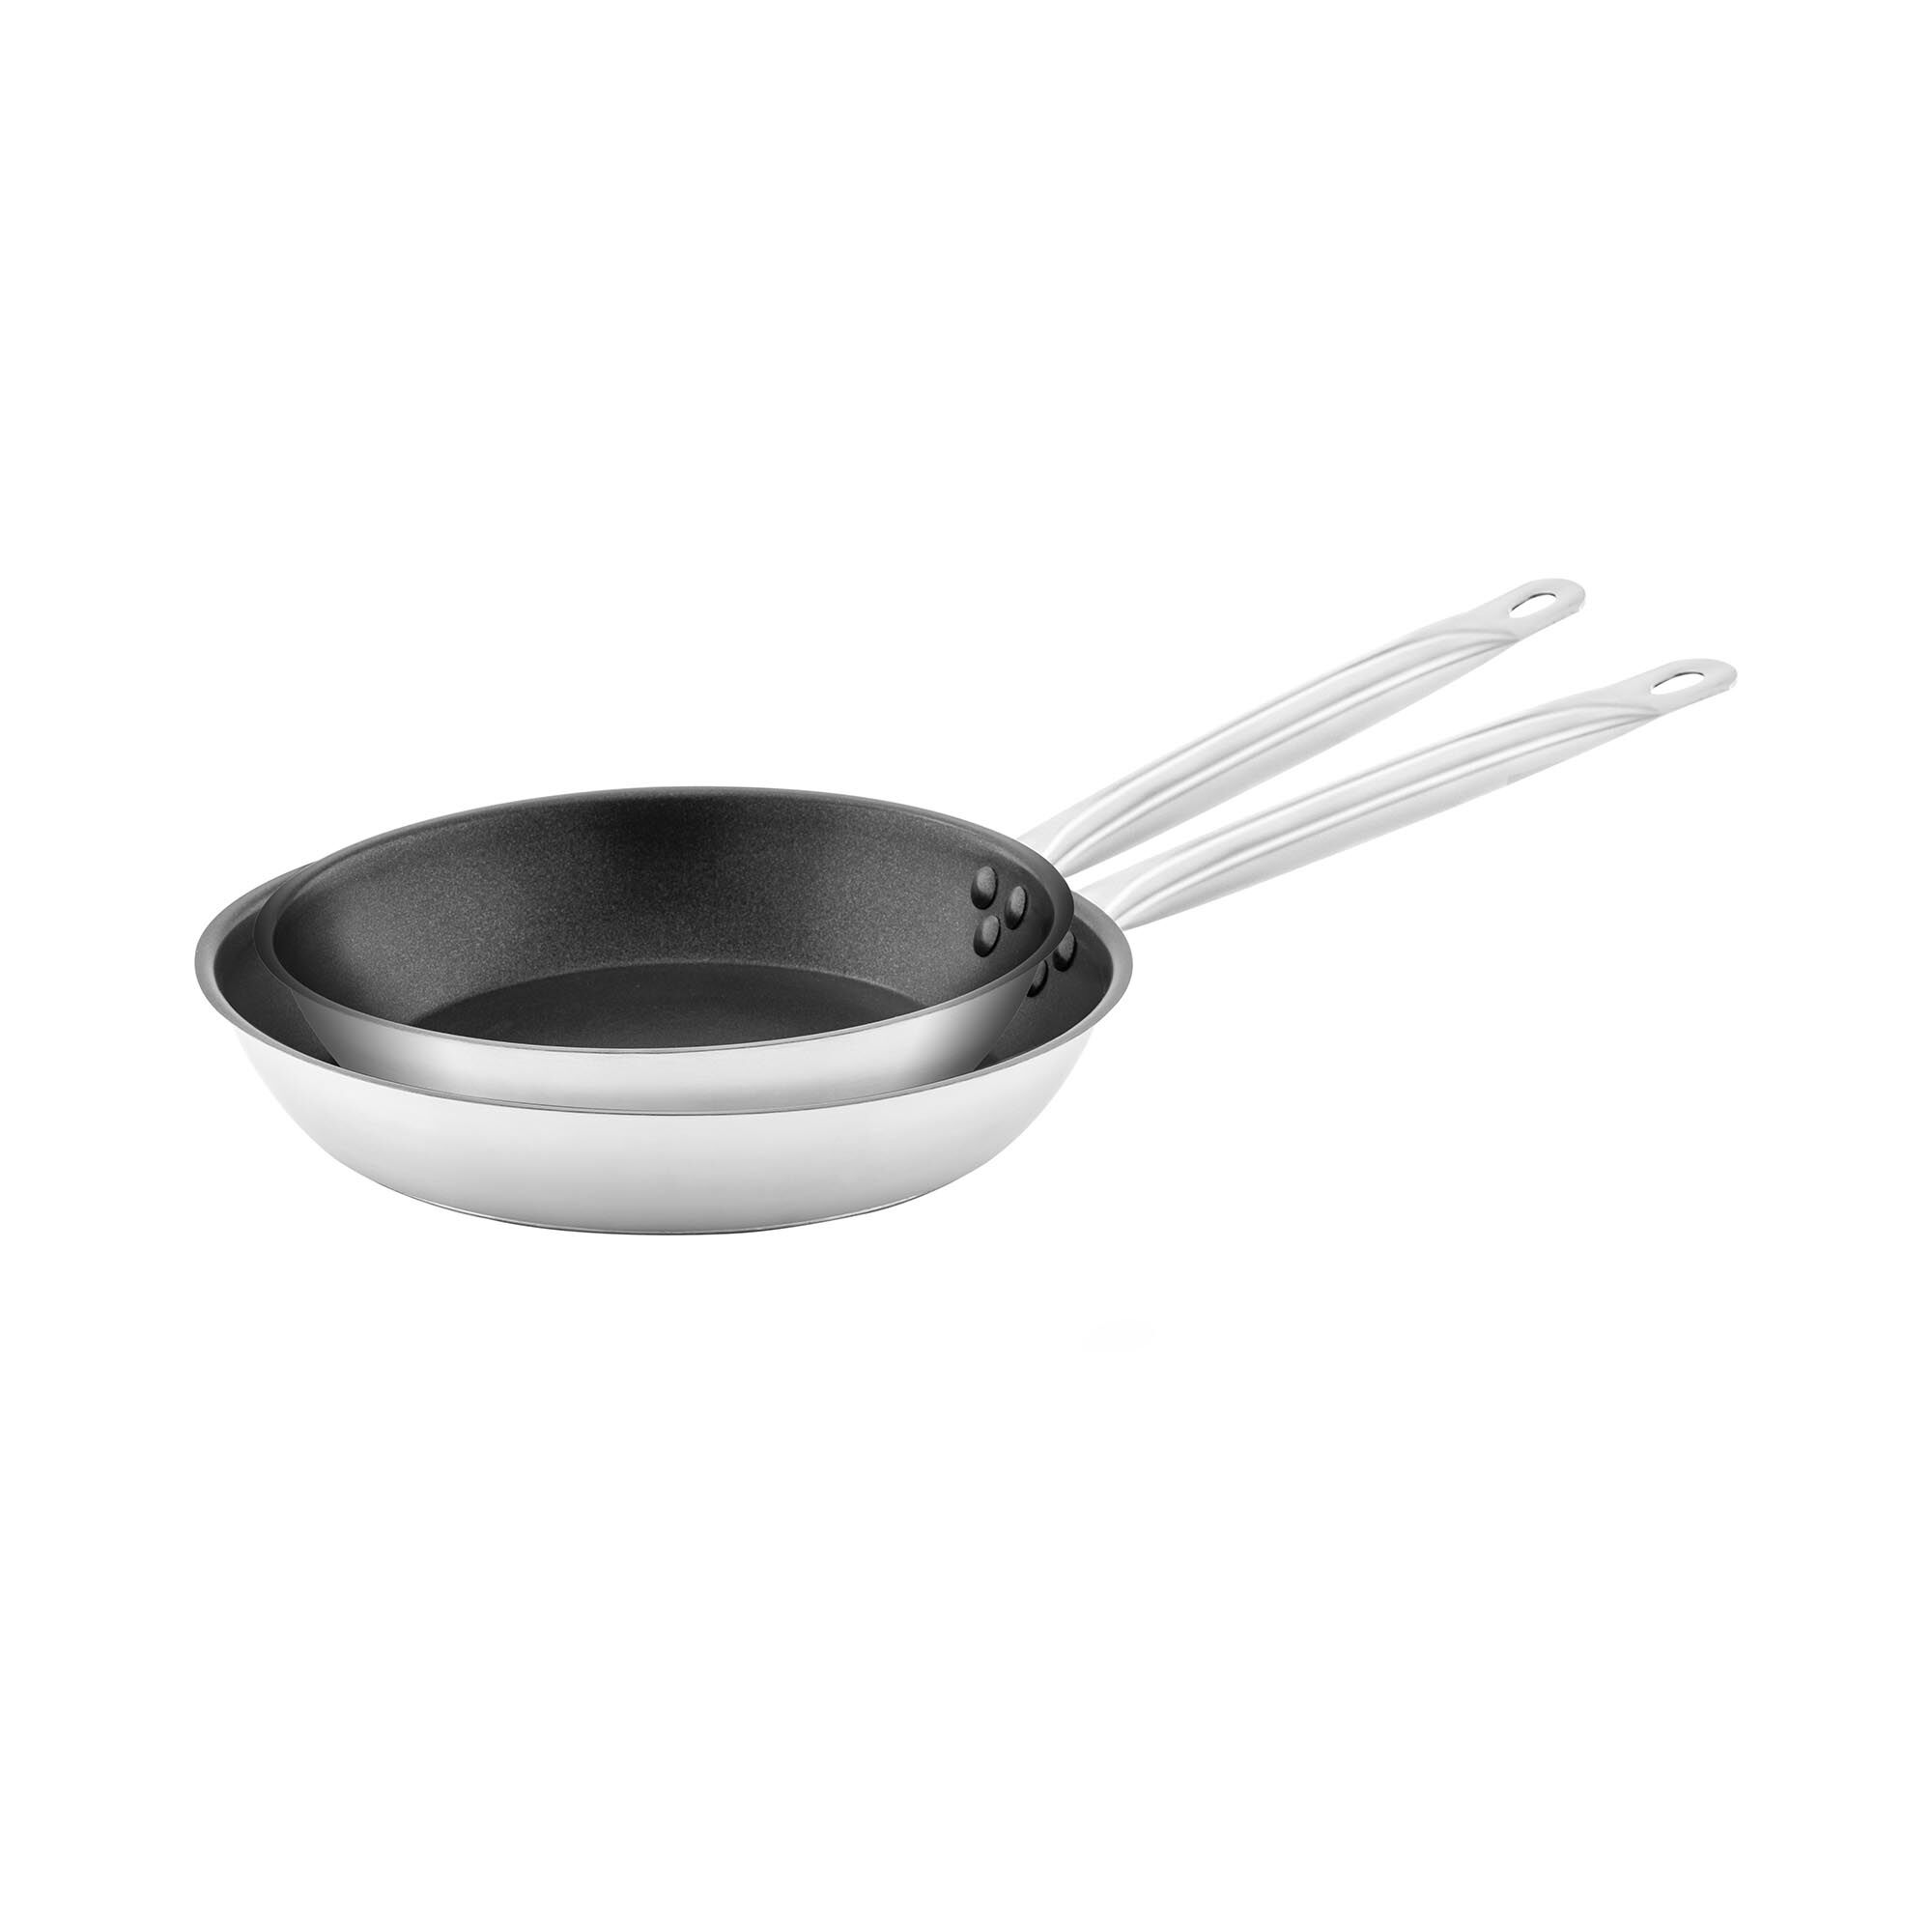 Royal Catering Stainless Steel Frying Pan - 2 pcs. - coated - Ø 24 / 28 cm x 5 cm